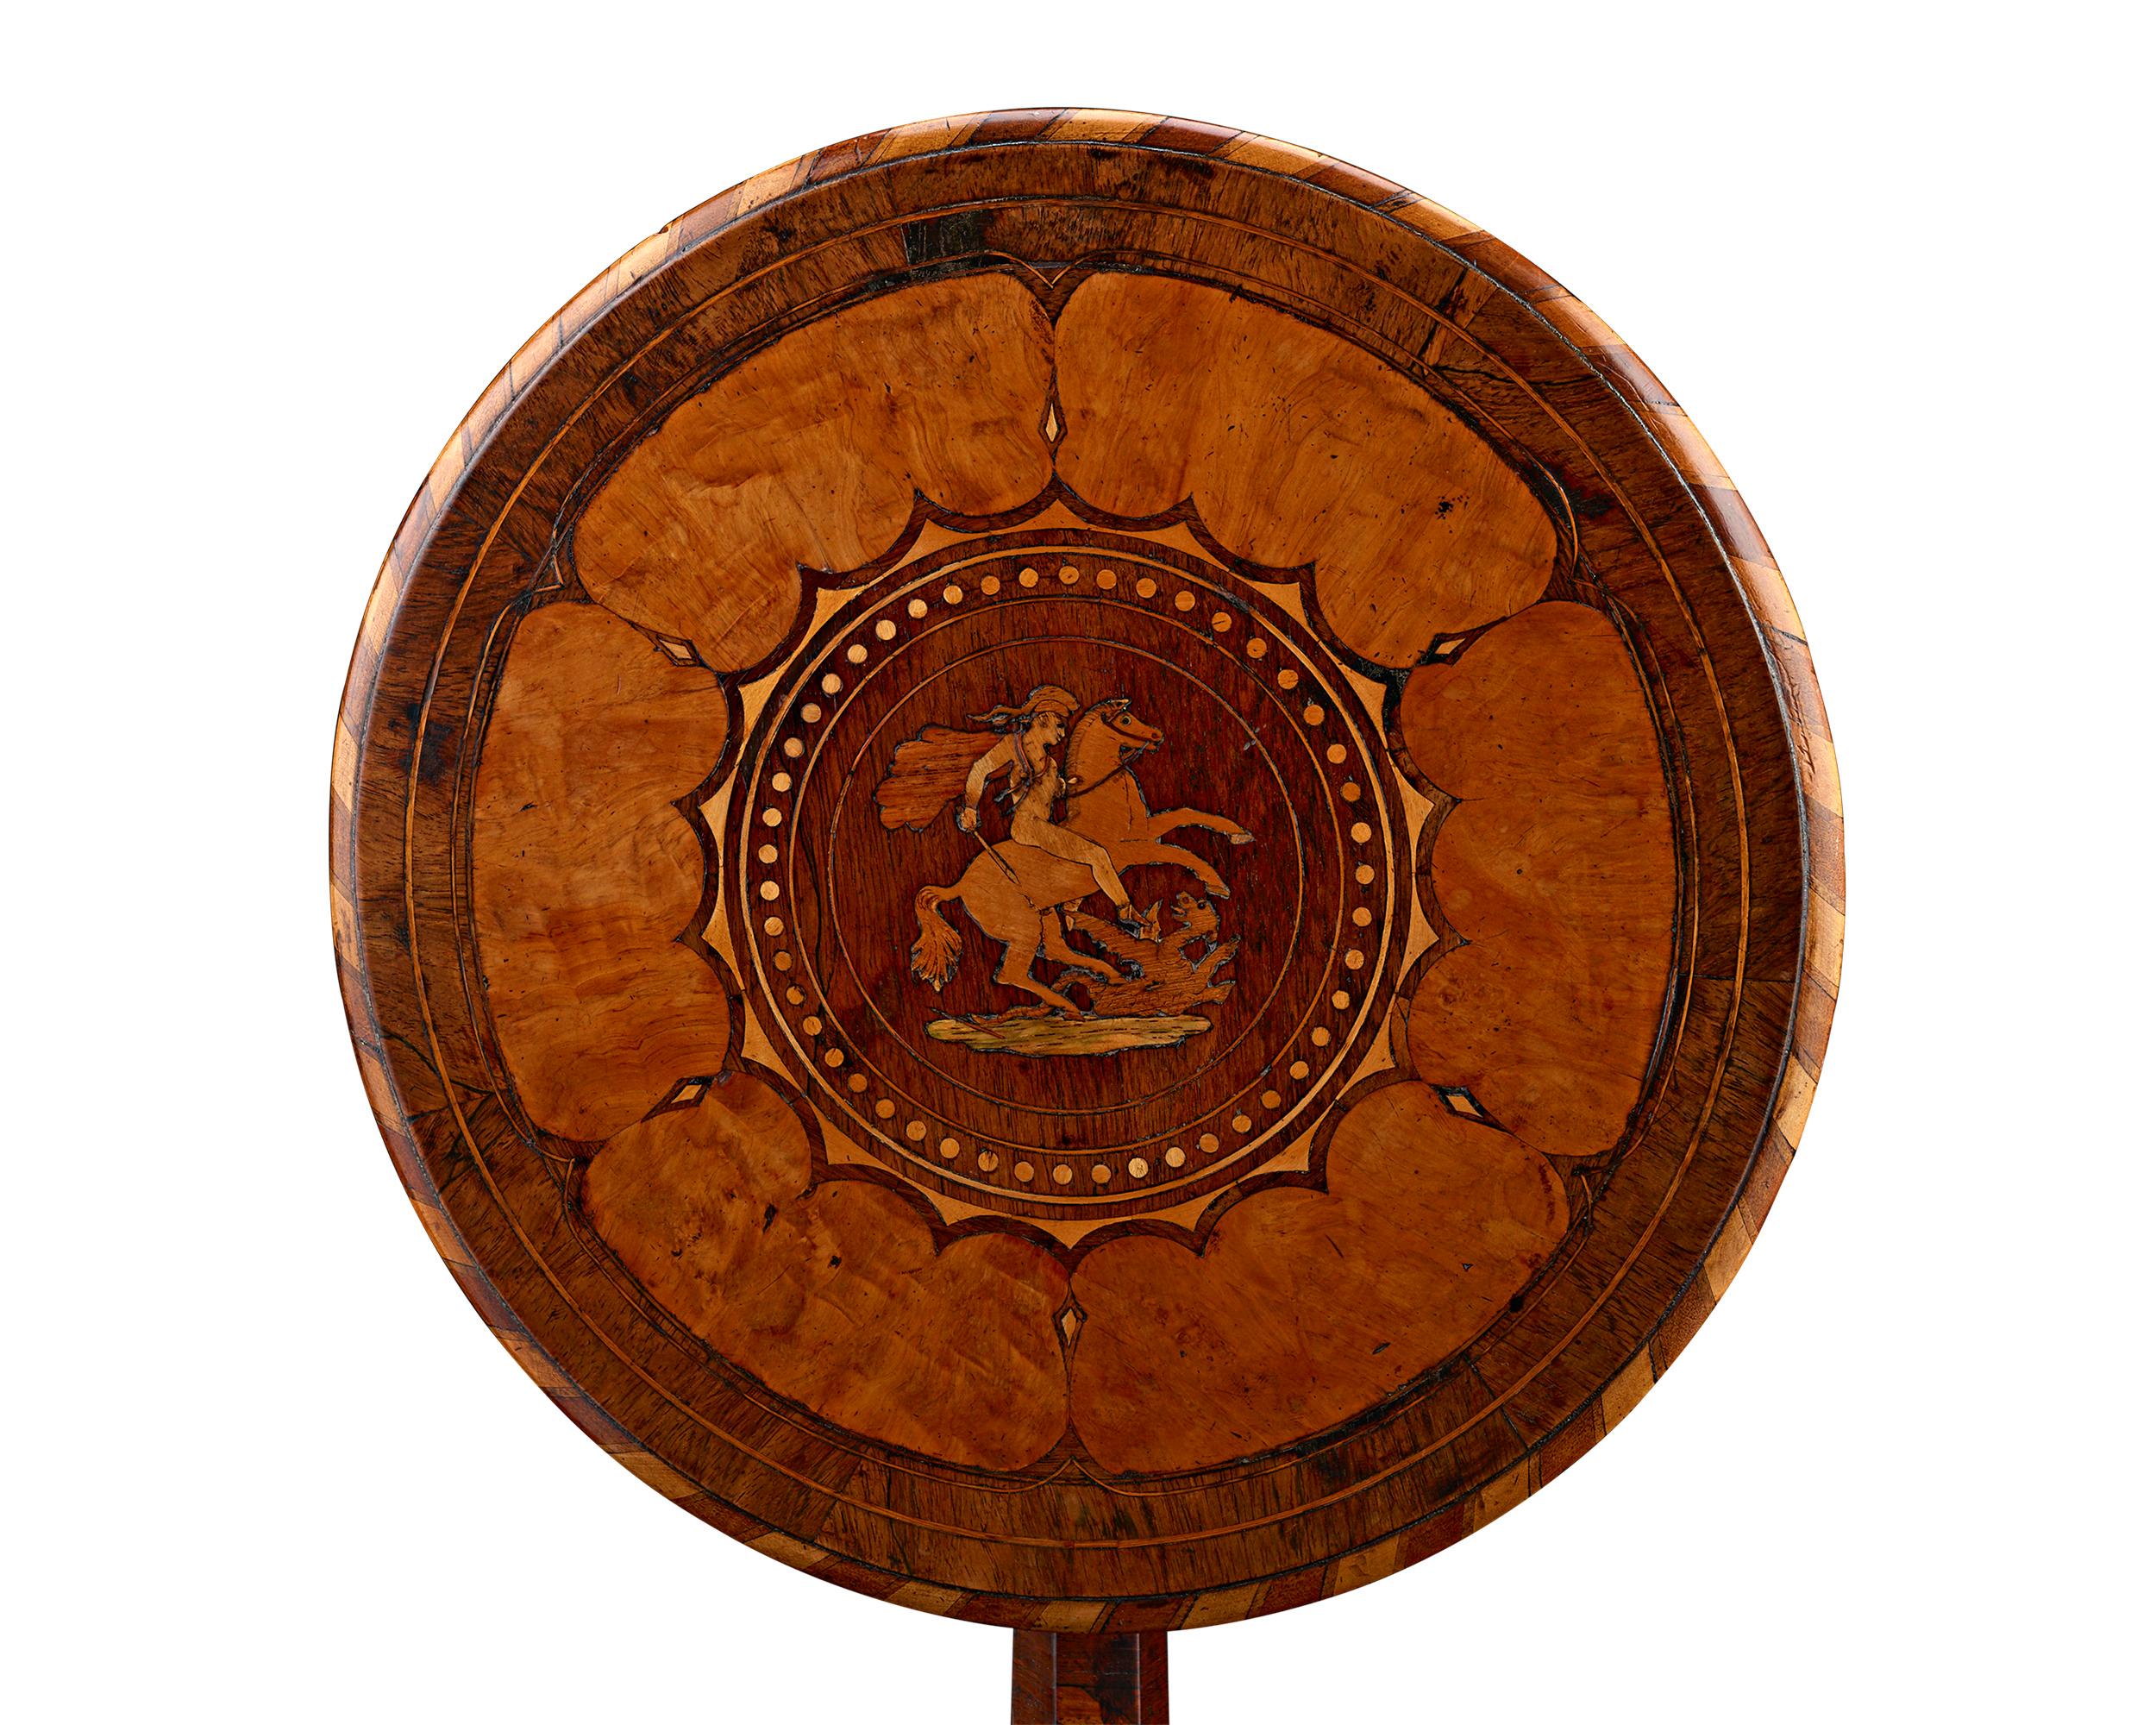 Elegance and artistry distinguish this stunning tilt-top marquetry table hailing from the Caribbean island of Grenada. Crafted from veneers native to the West Indies and South America, the table features the inlay of St. George slaying the dragon,